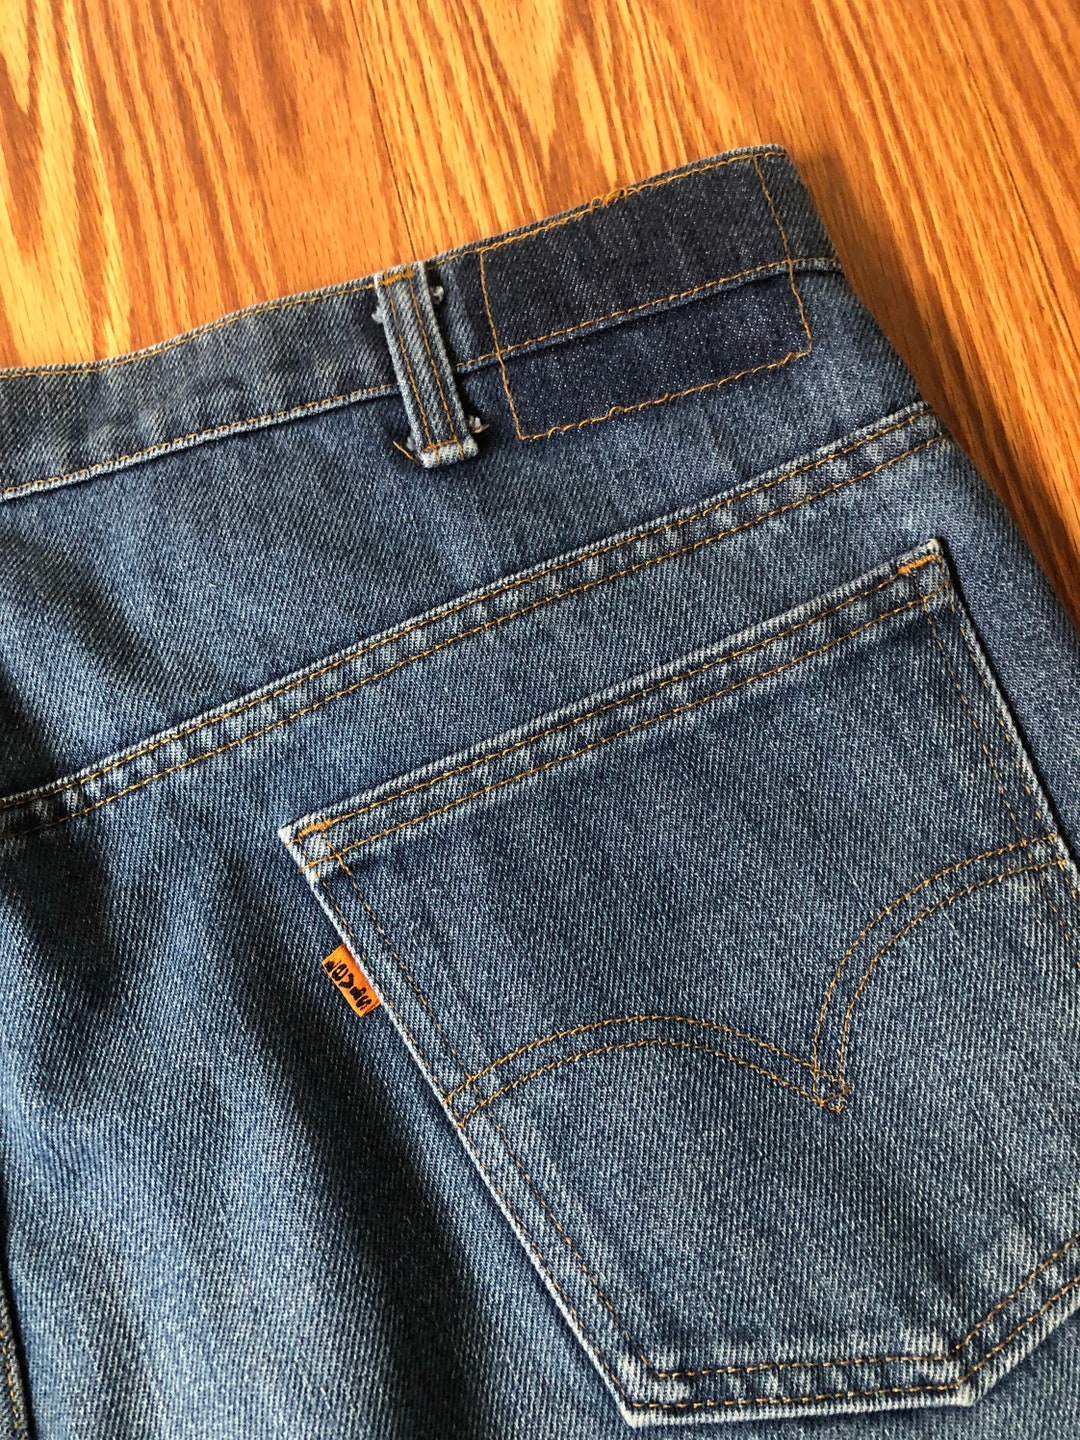 Lightly Faded 1970s Bootcut Levis 517 Jeans 40x30 - Etsy